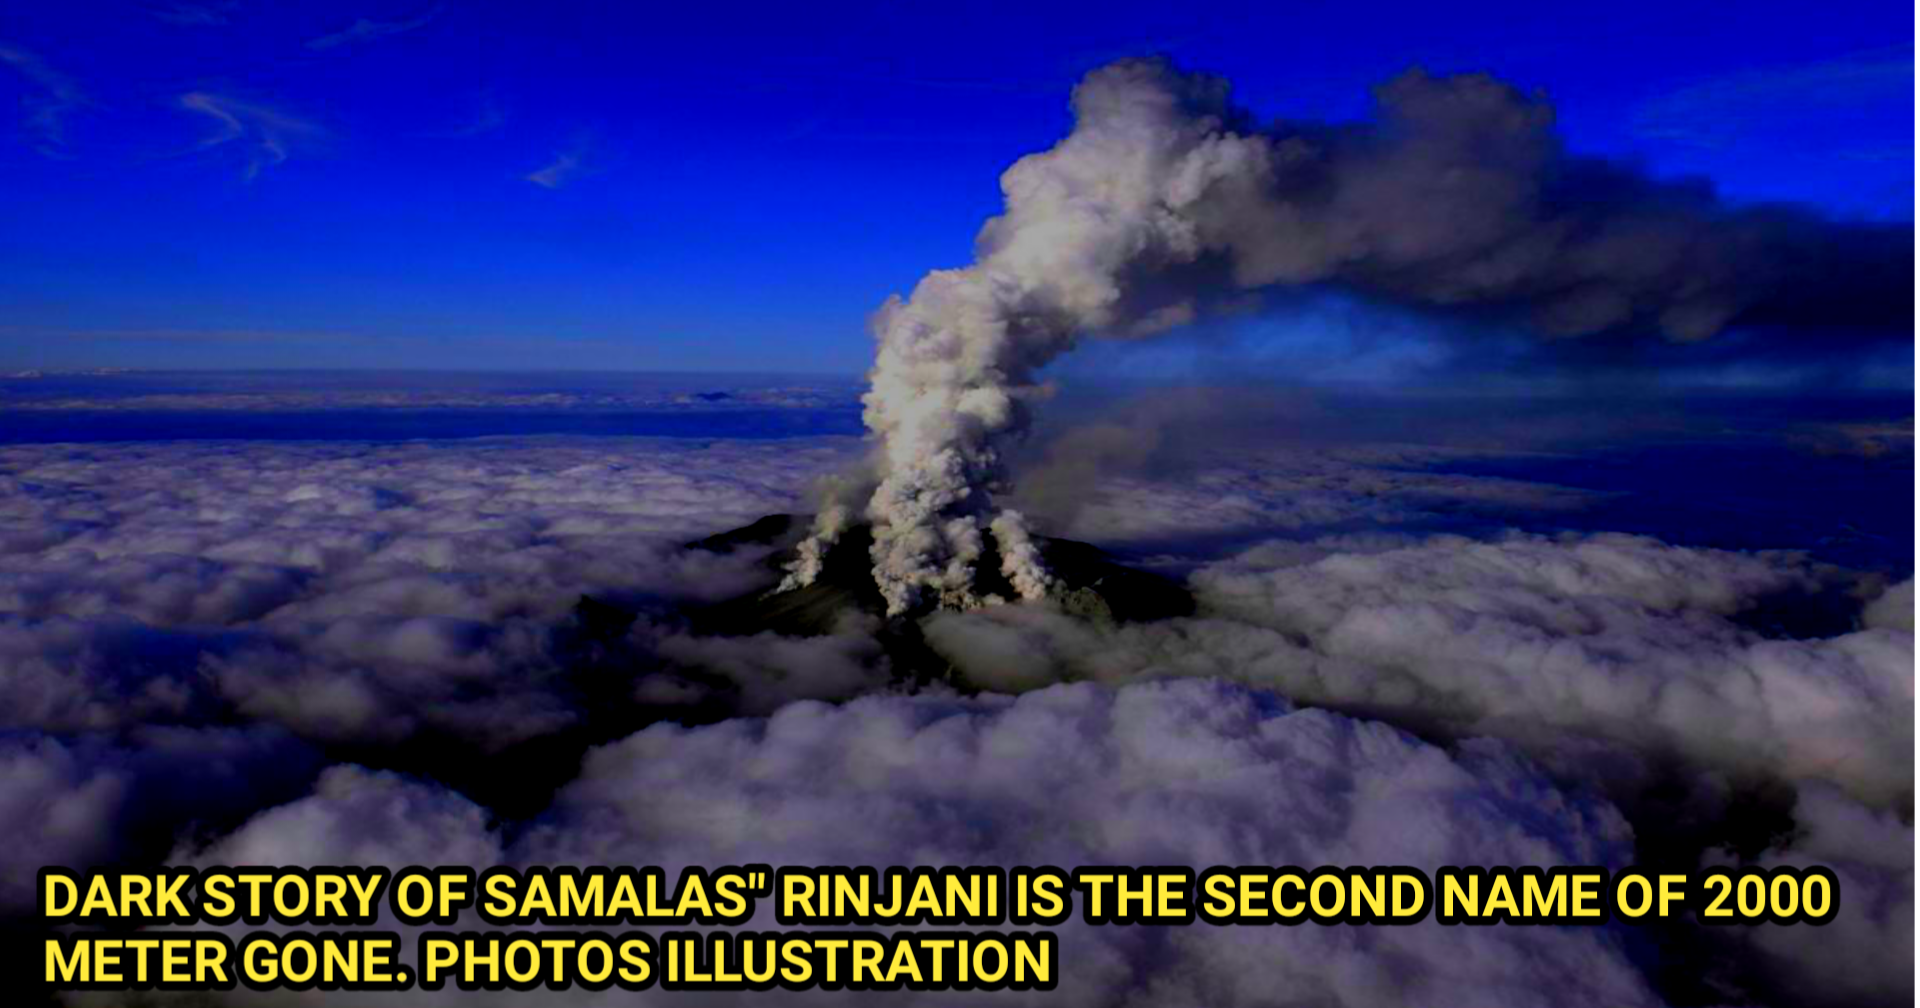 Samalas is the first name Of Mount rinjani. Mount rinjani the New mountain after samalas mountain loss Higher 2000 mtr. in Old Story the samals mountain highers 5000 mtr.